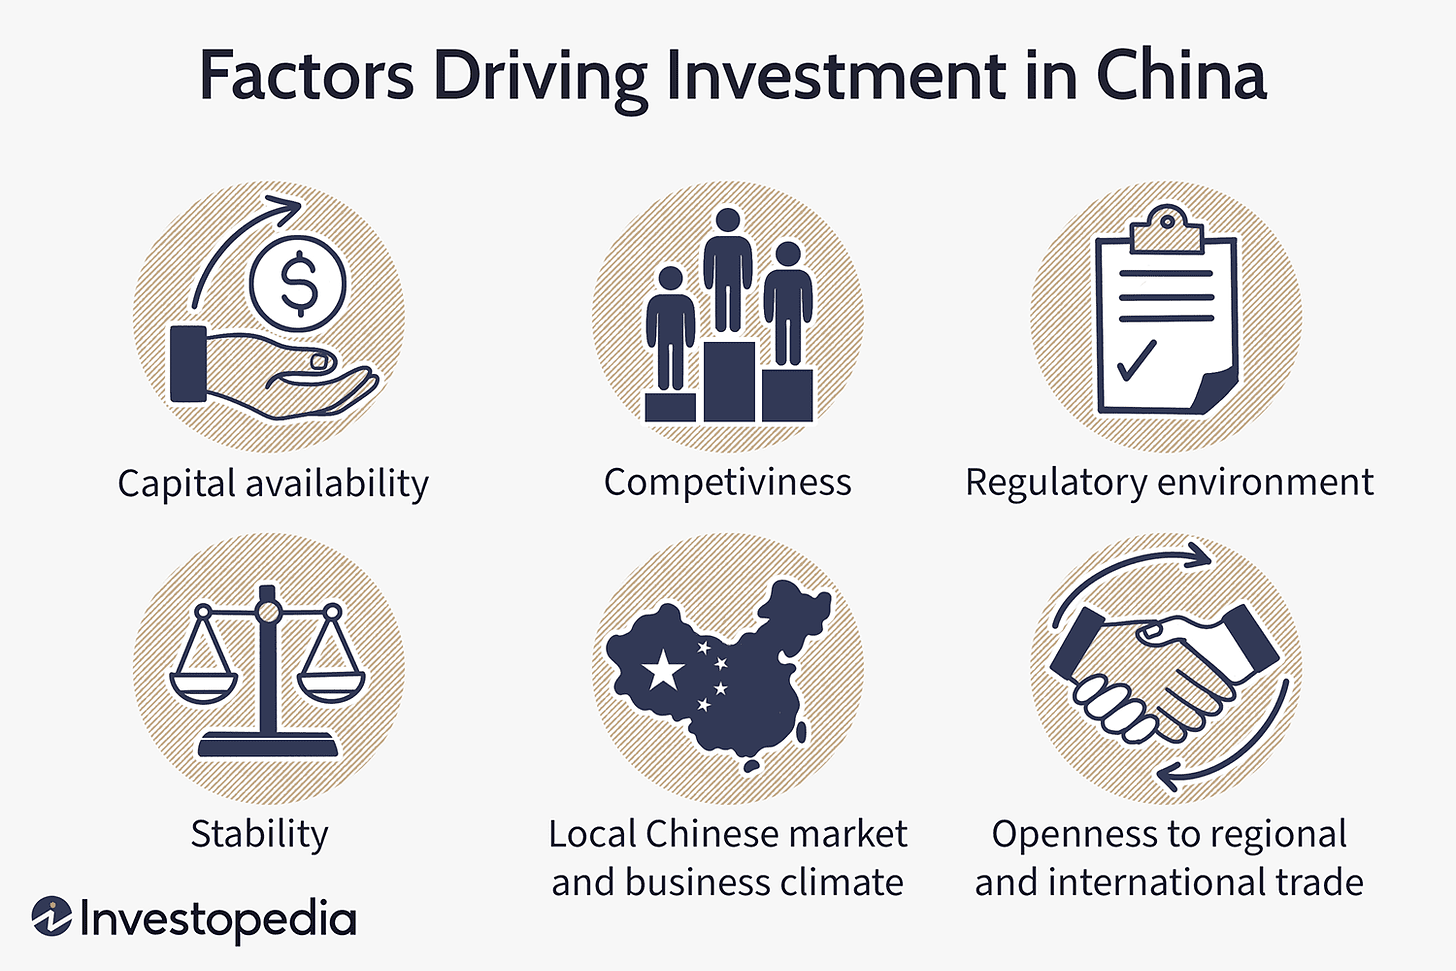 6 Factors Driving Investment in China